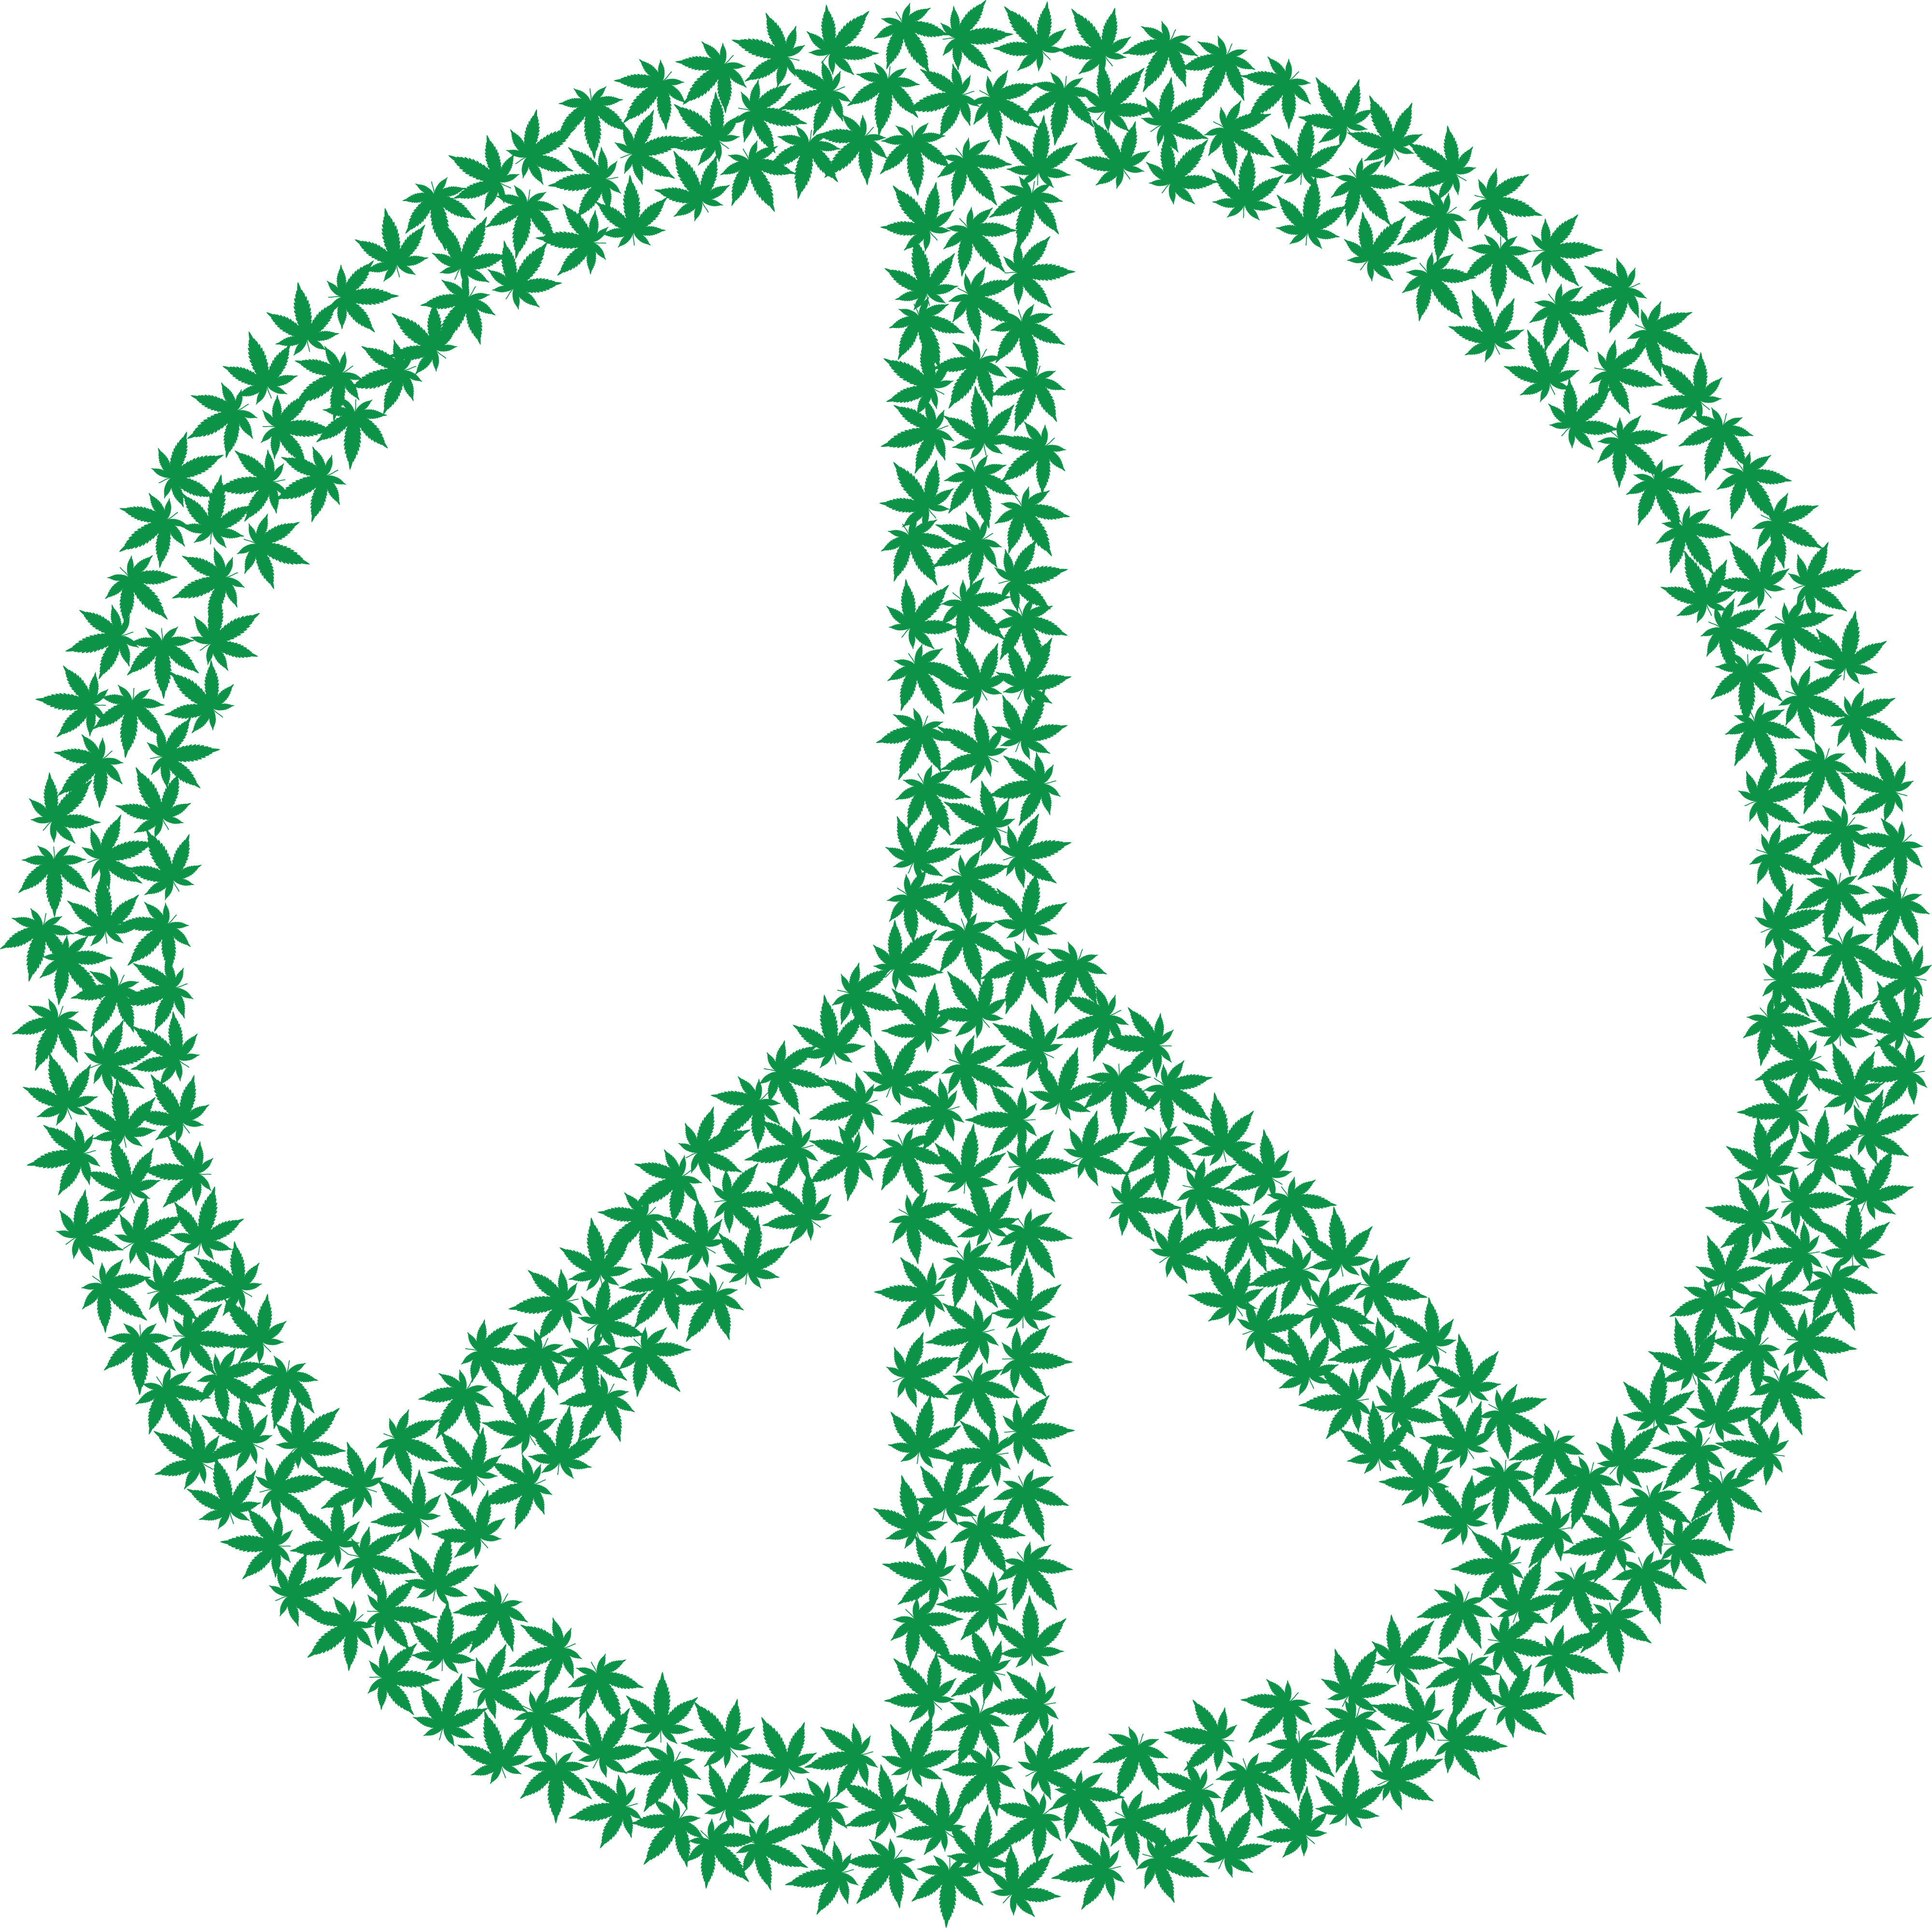 Free Clipart Of A - John Lennon Give Peace A Chance (4000x3991)